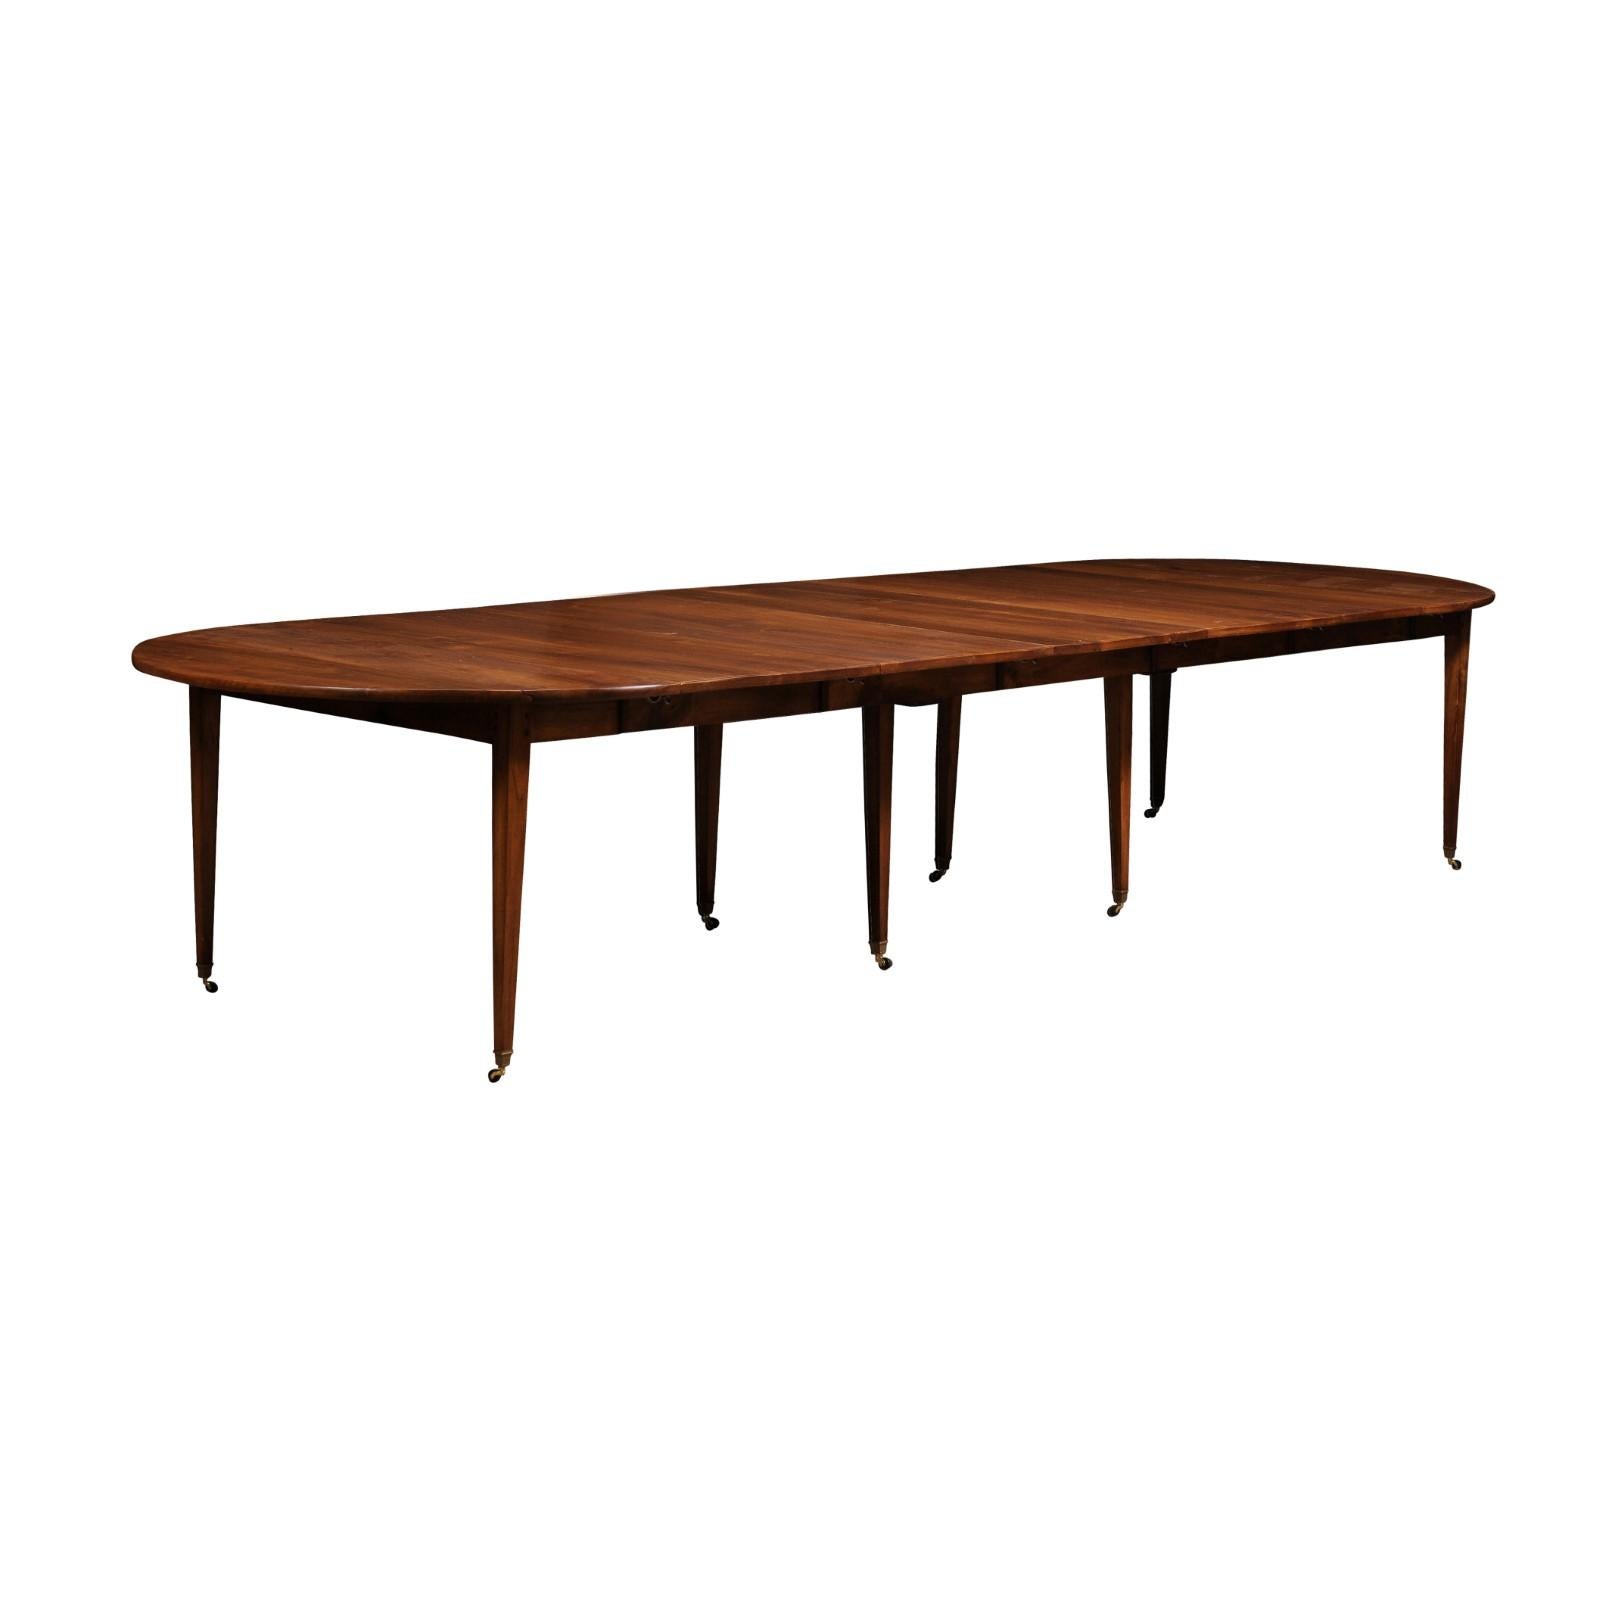 A French walnut oval extension dining room table from the early 20th century, with five leaves, tapered legs and casters. This exquisite French walnut oval extension dining room table from the early years of the 20th century marries classic elegance